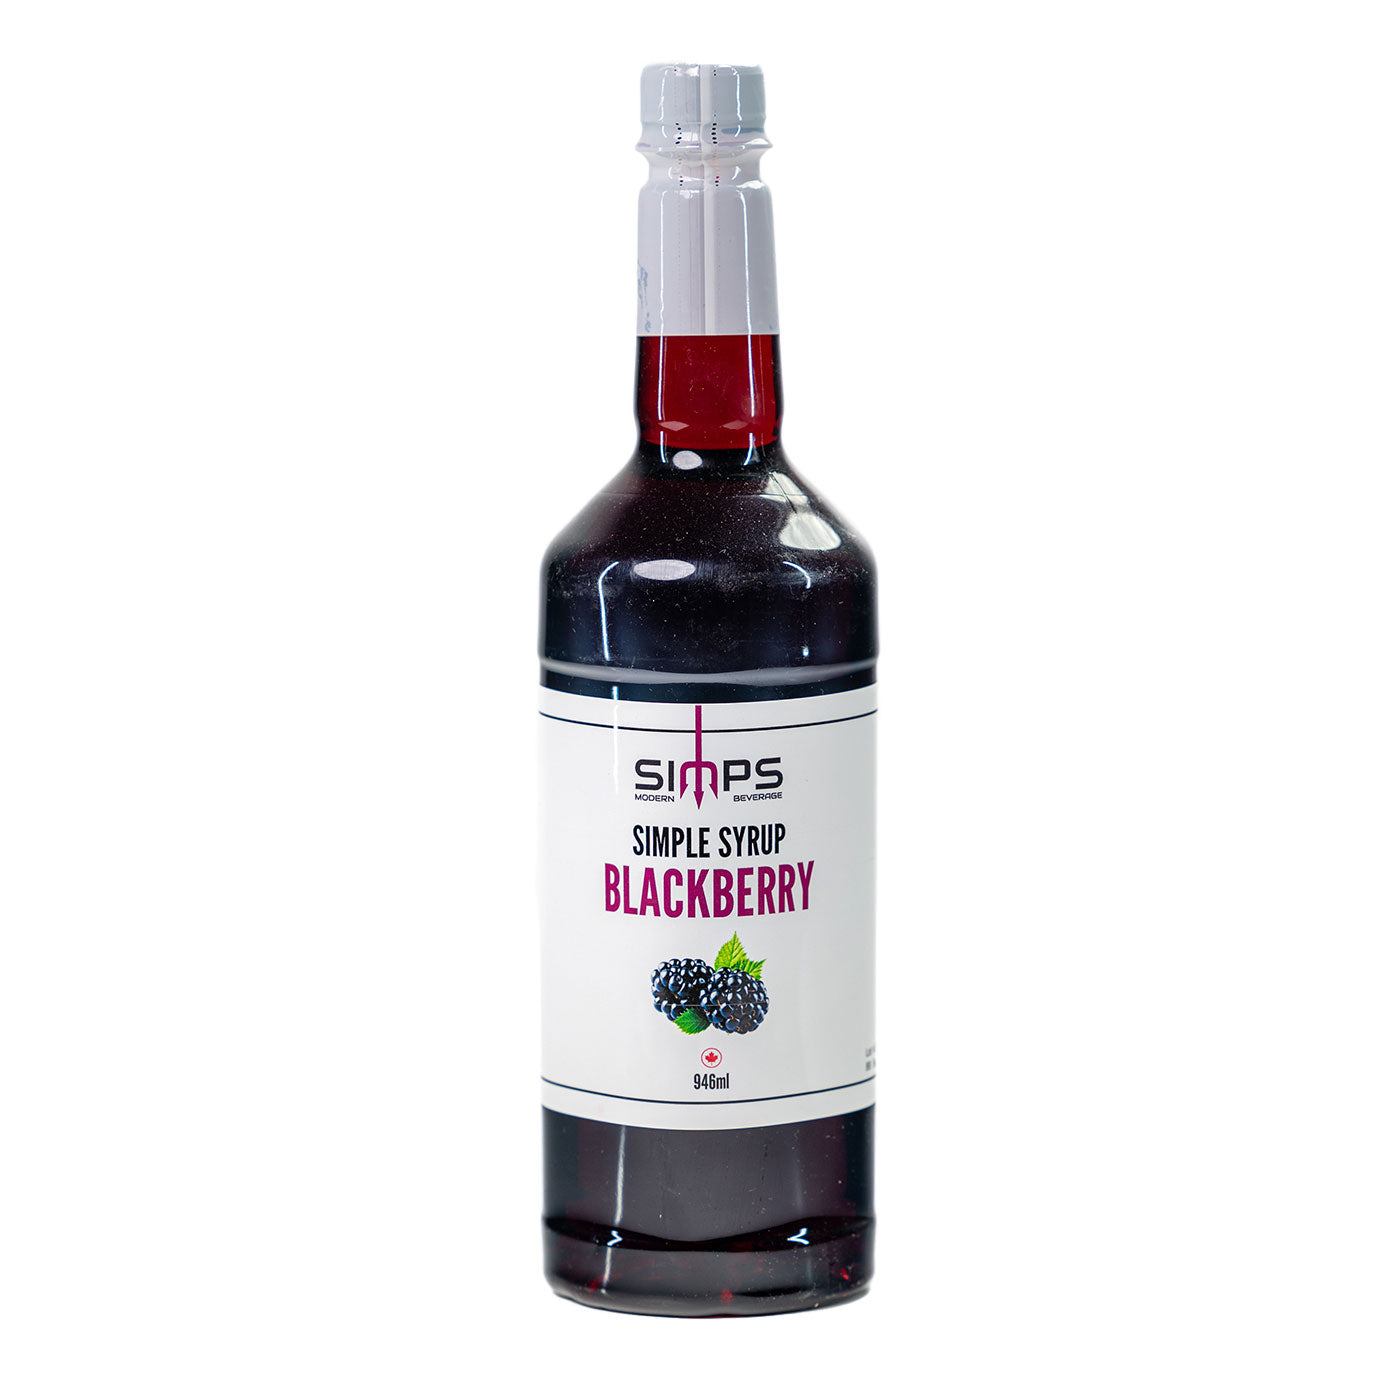 Simps Blackberry Syrup